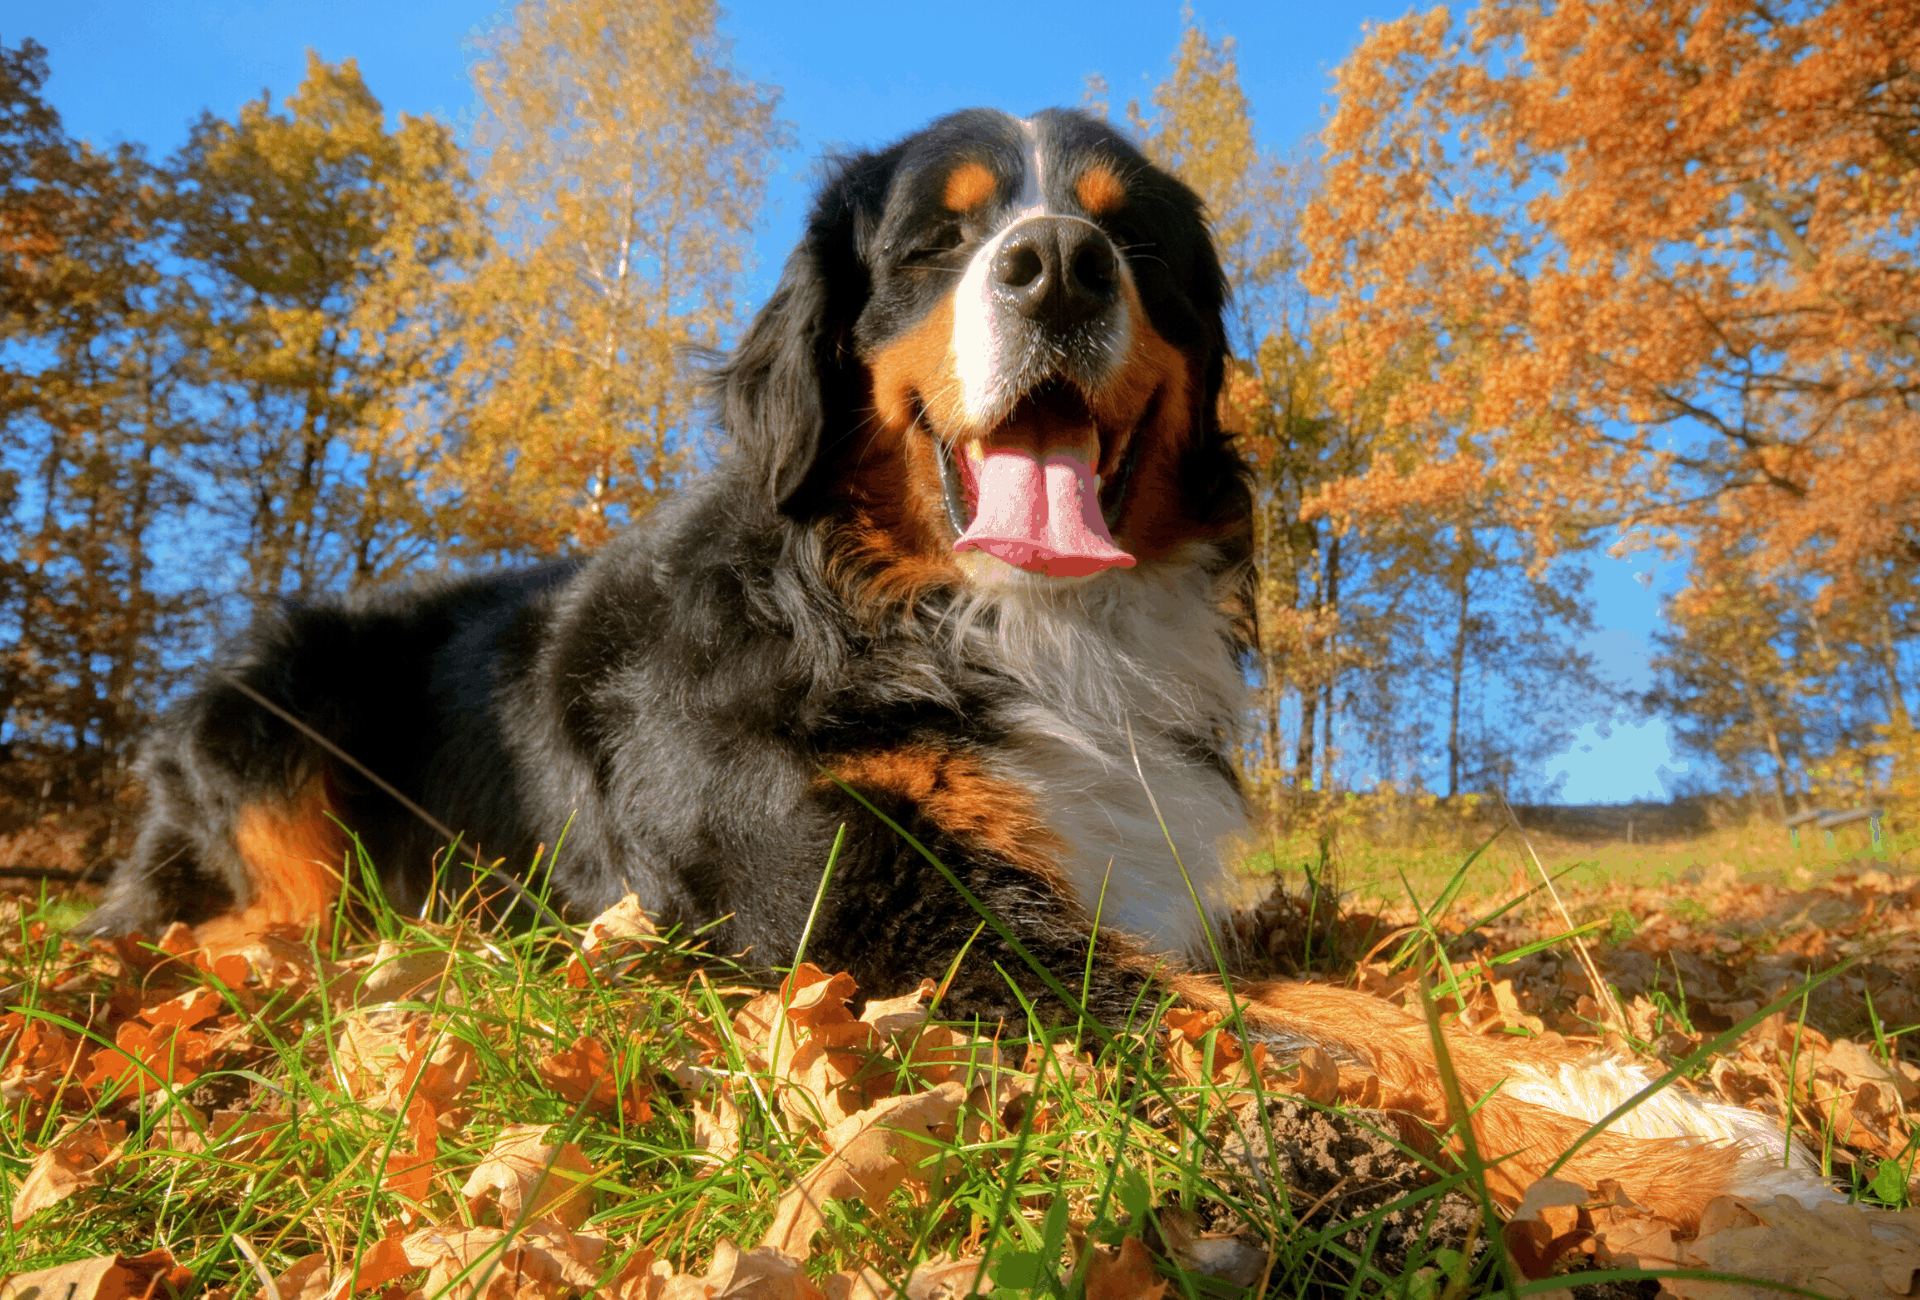 Bernese Mountain Dog on leaf-covered grass.